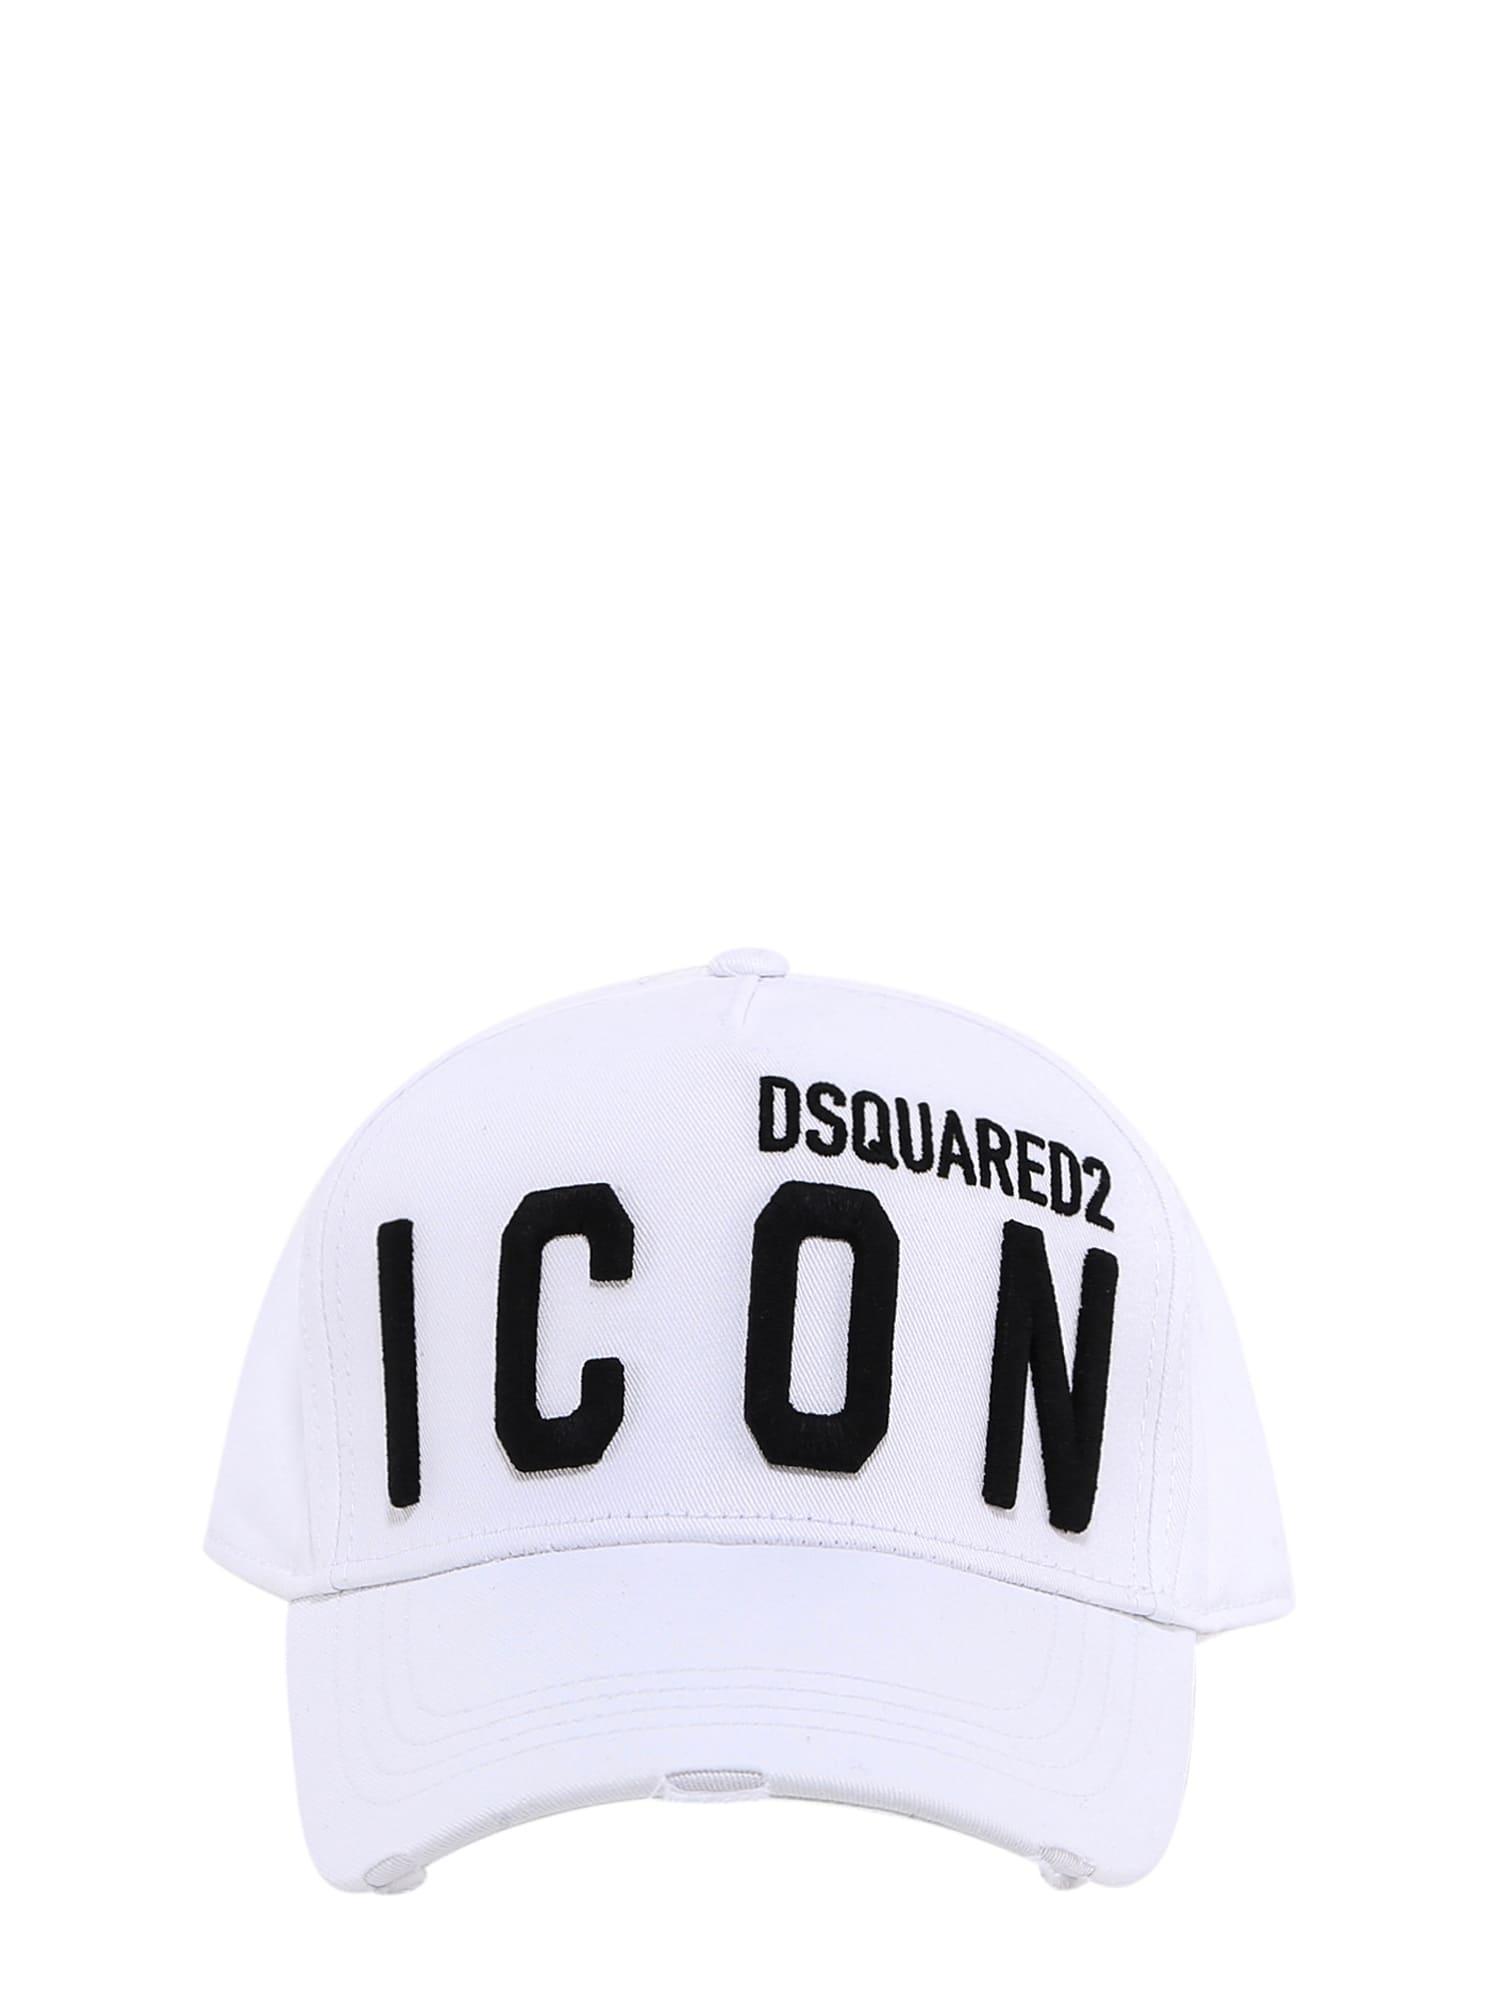 DSquared² Hat in White for Men | Lyst